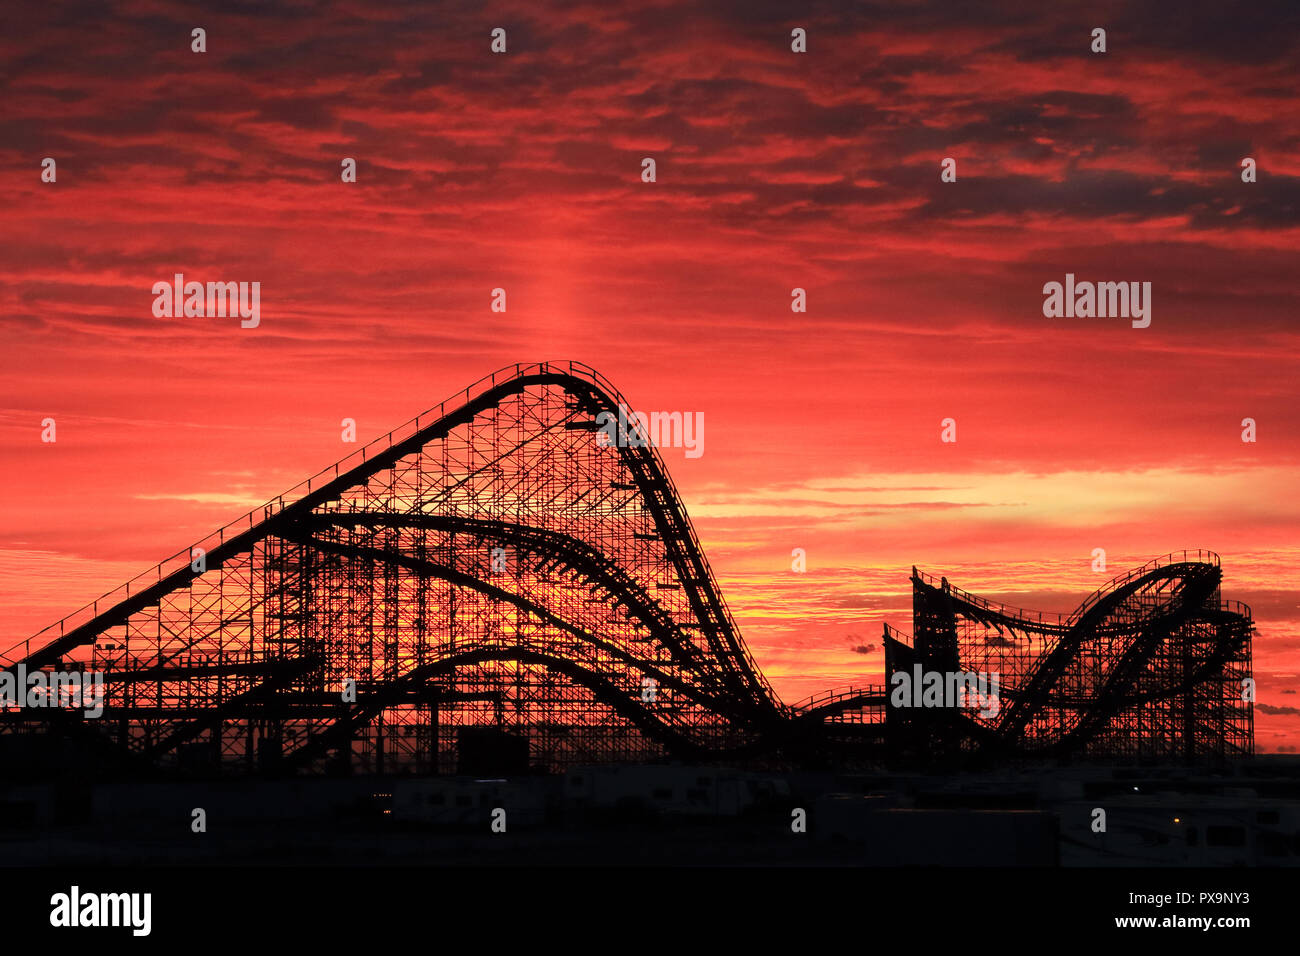 The Great White Roller Coaster at dawn on the boardwalk at Wildwood, New Jersey, USA Stock Photo